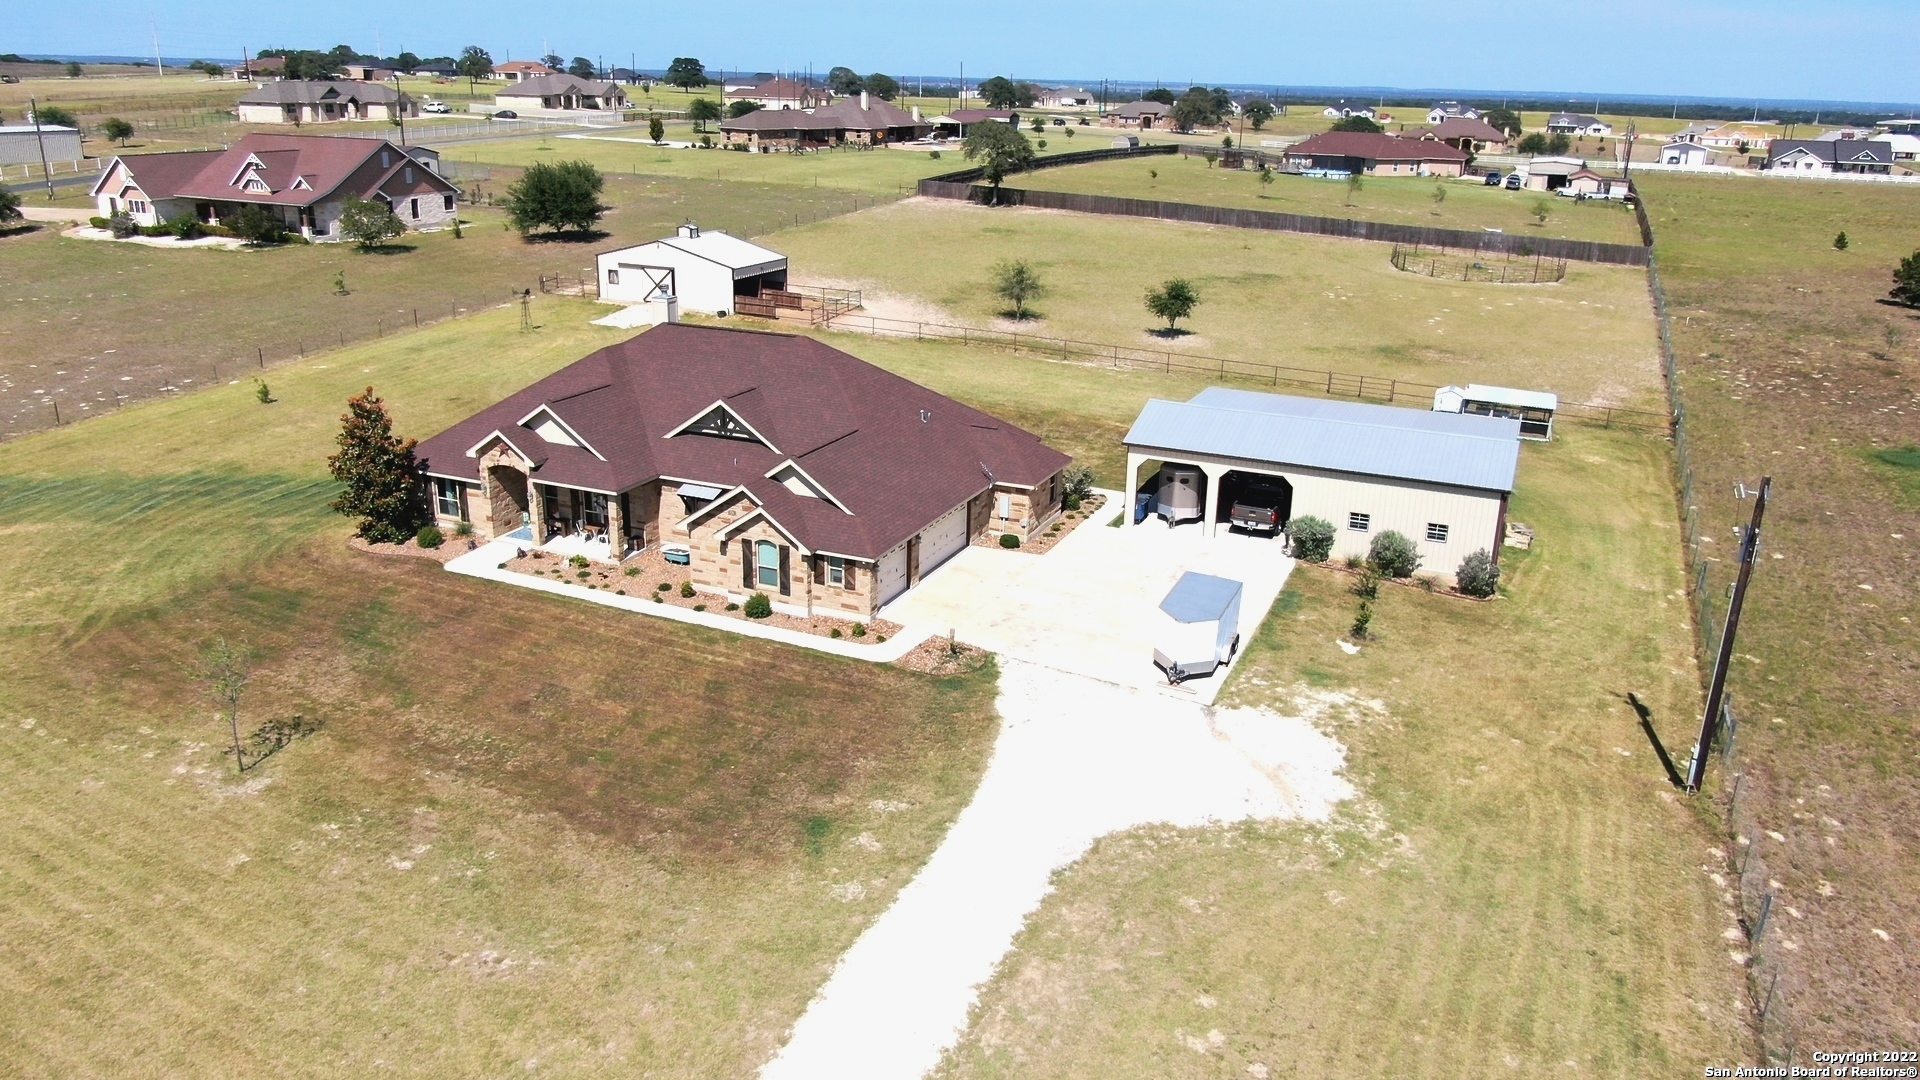 **Horse/Animal Friendly Property** w/A Hilltop Setting & Great Views on 3.04 ACRES that is Fully Fenced & Crossfenced w/Decorative Entry Gate & Opener in Triple R Ranch Subd,No Hoa dues or City taxes,Low 1.9% Tax Rate..**This is one of those Move-in,Unpack & Relax Type Home** Nearly Everything's DONE to Include Fencing,Landscaping w/Sprinkler Sys,Out-Bldg's,Workshop,Window coverings,Chicken Co-op & MORE..Approx 50x25 *Metal Barn/Multi Purpose Bldg* w/Covered Pens/Stalls w/Turn-outs,Wash rack & Tach Room *Approx 25x25 Fully Insulated Metal Bldg Workshop* 25x25 Covered Metal Carport * 36x25 Attached 3-CAR GAR w/Epoxied Flooring and 50x20 Covered Metal Equip Storage area...Approx 2700sf *Very Clean 1-Owner 4-Side Rock Ranch Style Hm that Displays a Ton of TLC Thru-out,Ceramic Tile Flooring & Granite Tops *Thru-Out* Very Open Floorplan w/Raised Decorative Beamed Ceiling,4-BD (Split bd plan) & 3.5 Bathrooms,16x13 Island Kit w/Dbl Ovens,Cooktop,Microwave,42" Custom Cabinets,Peninsula Style B'Fast Bar w/Rocked Facing,Walk-in pantry,14x11 B'Fast nook AND 13x12 Dining Rm or 2nd Living area,2-Wood Burning Fireplaces w/1 in the Approx 30x16 Covered Patio/Outdoor Living area that also has a Wet-Bar,Bathroom Access & Add'l 36x16 Concrete Patio for Entertaining/BBQing,17x14 Main Bd w/16x12 Ba that has 2-Walk in closets,2-Sink Vanities,Jetted tub & Tiled Walk in Shower,The Other 3-BD (13x11,12x11 & 12x10) have Good Sized Closets,HM has Security Sys,Central Vac Unit & FIBER OPTIC INTERNET,Gvec Electric & SS Water Co..Take a Look I Believe You Will be Impressed..Shows like a Model Hm...